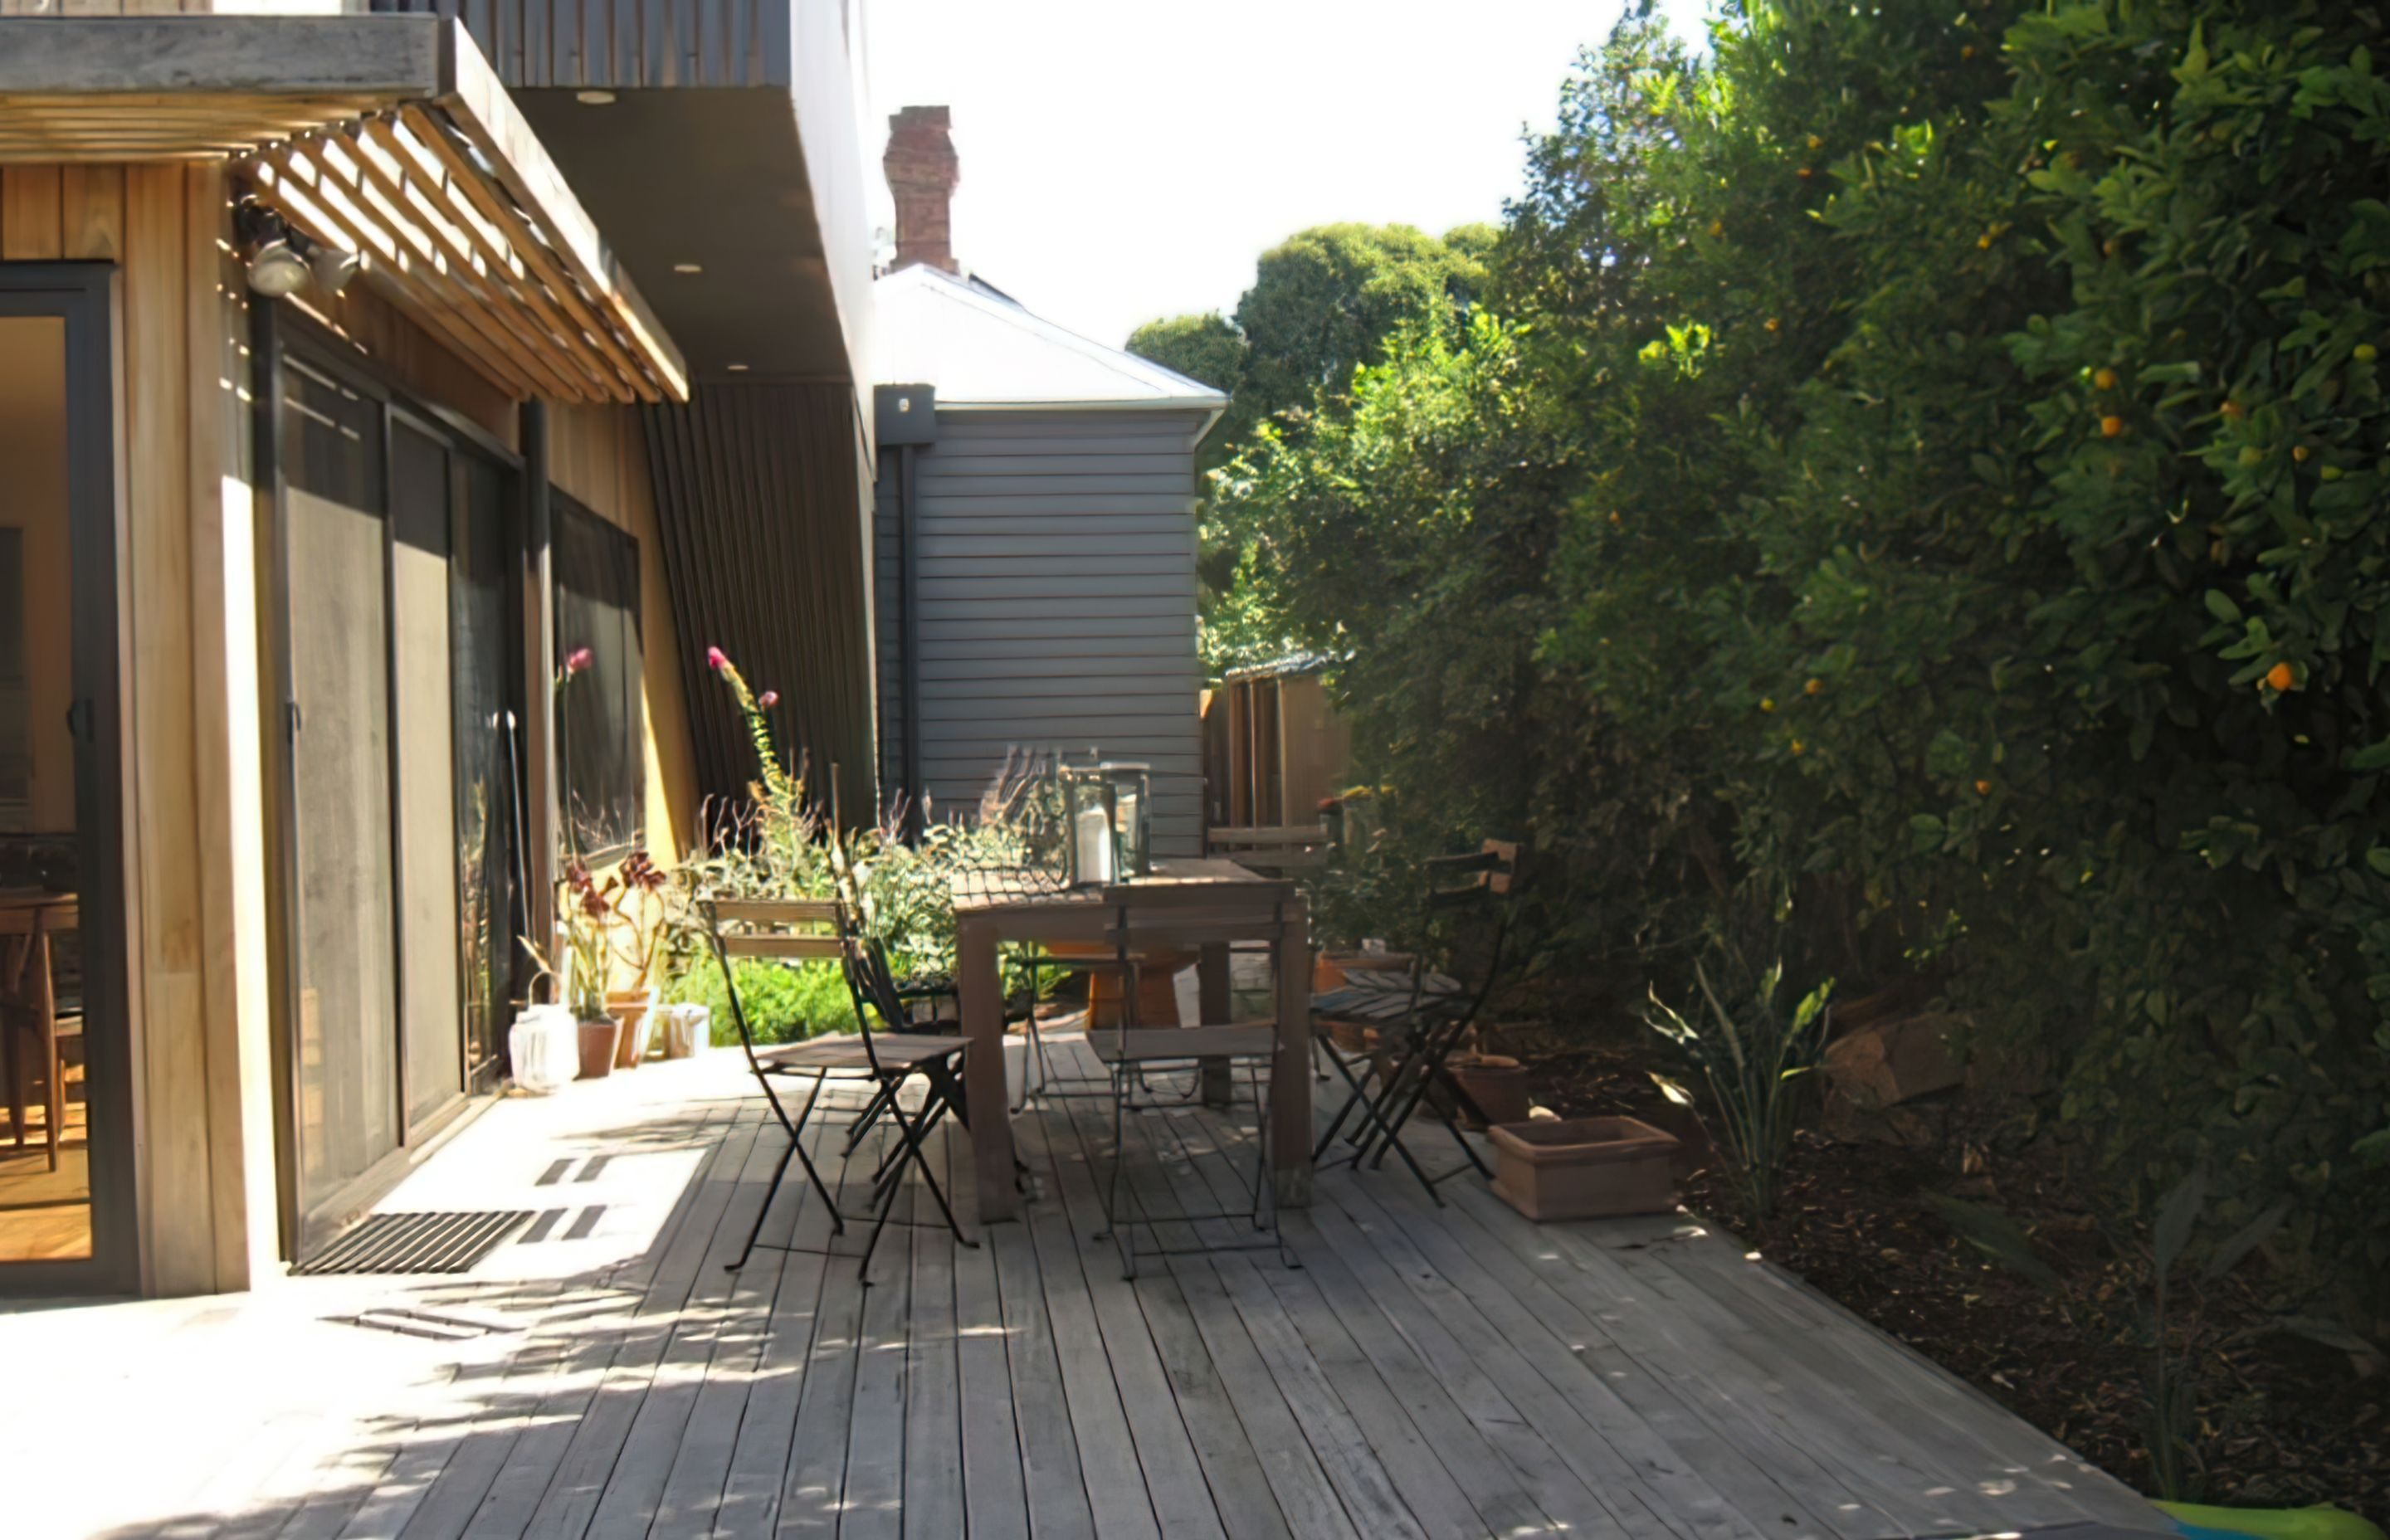 AFTER the garden design. A new decking area amid a secluded garden